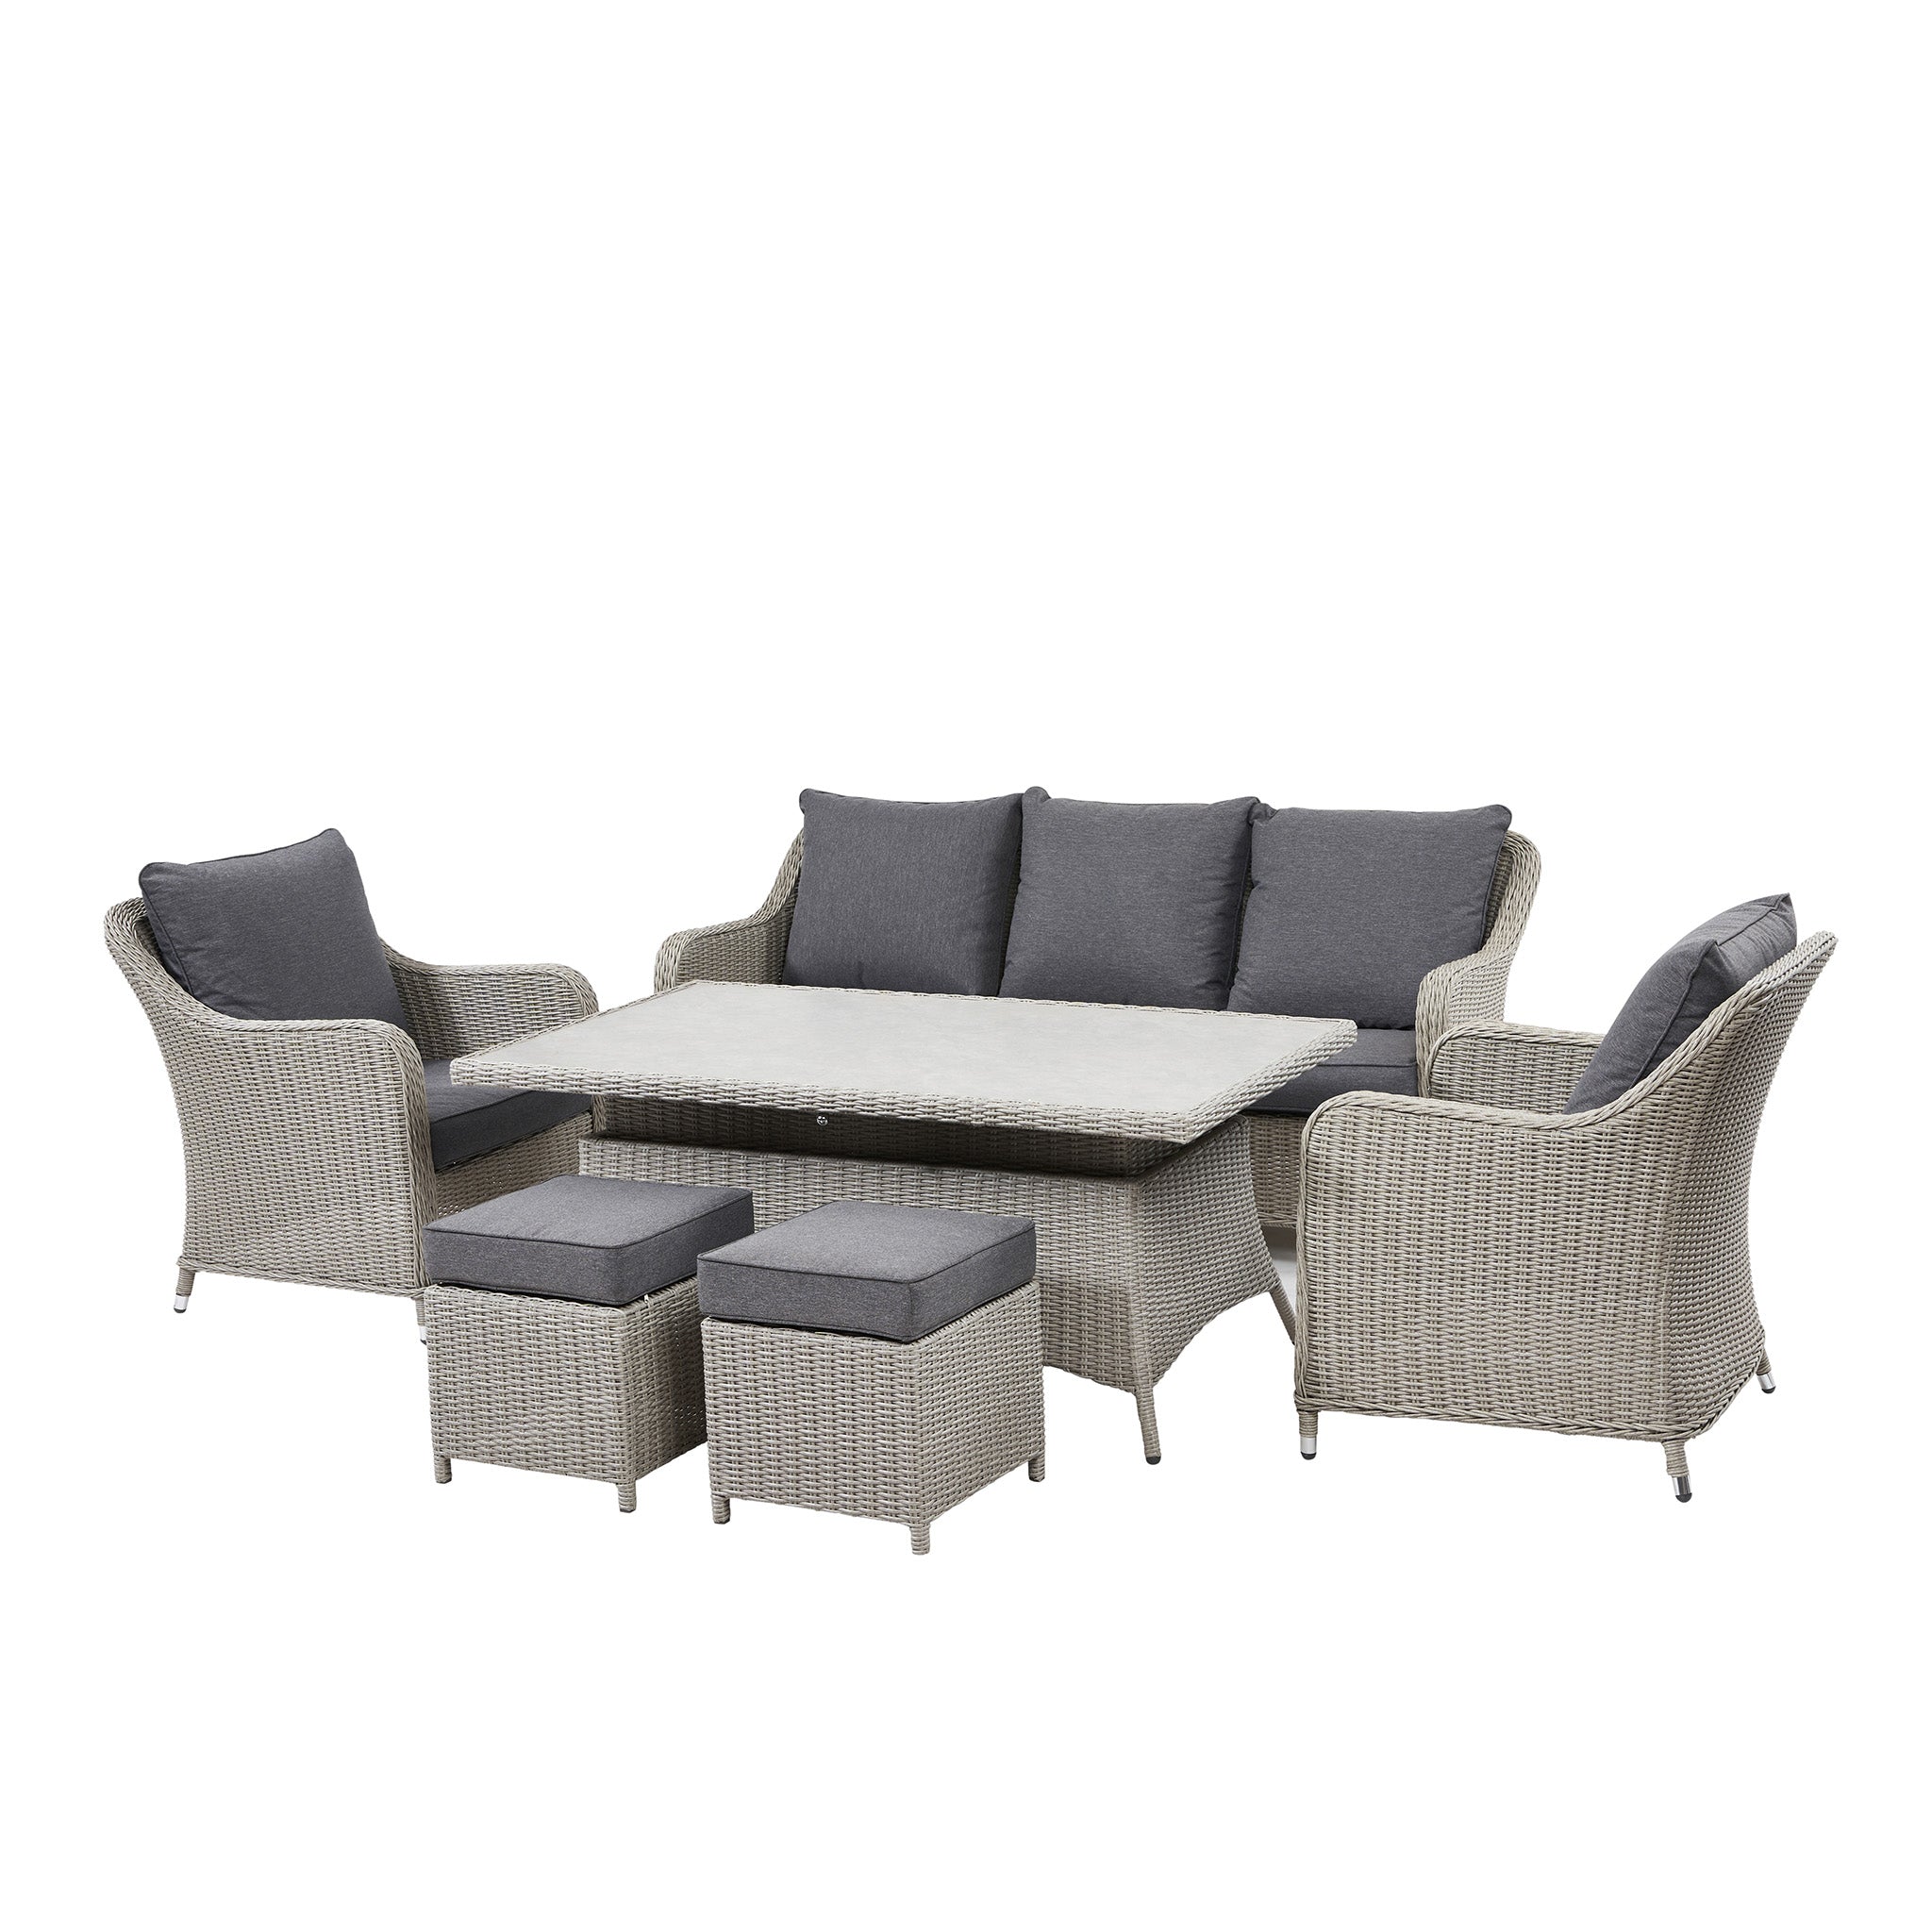 Antigua 3 Seat Rattan Sofa Dining Set with Rising Table in Stone Grey